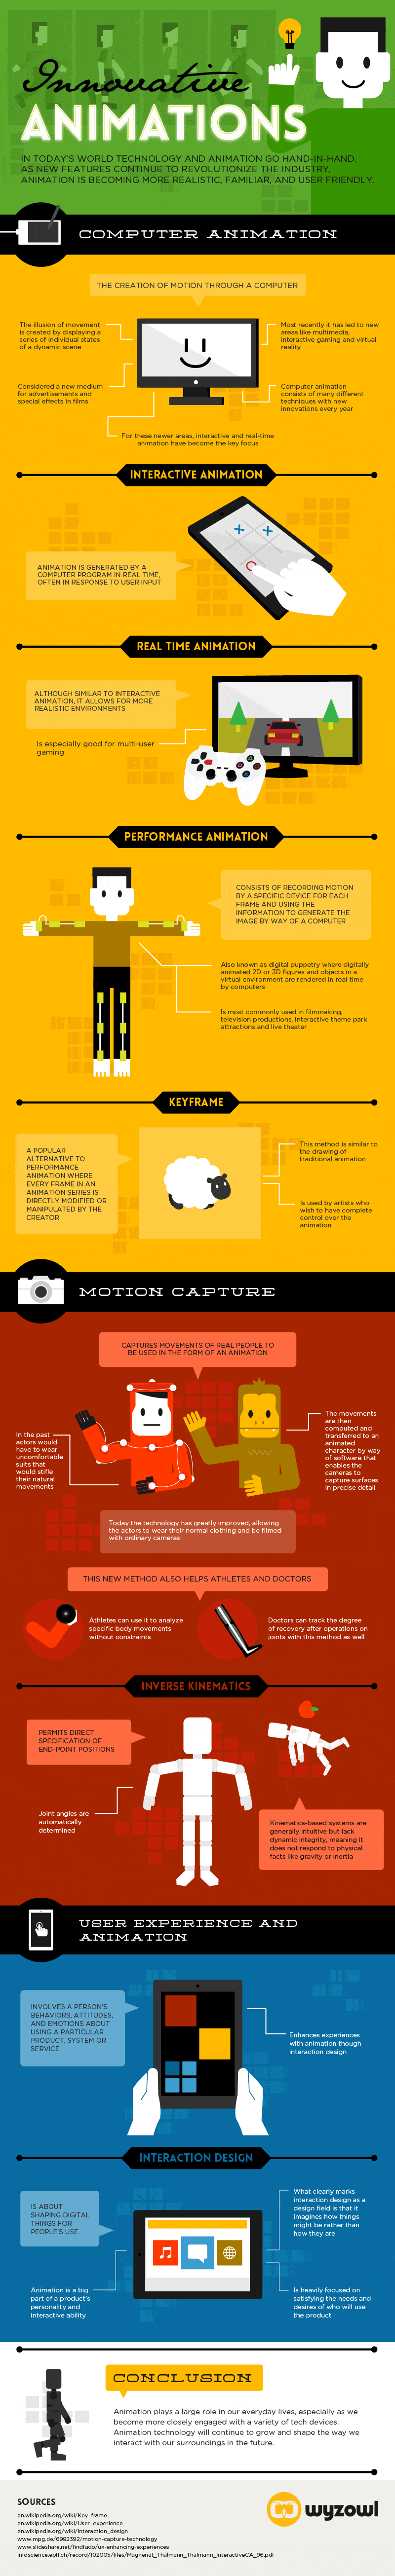 Innovative-Animations-Infographic